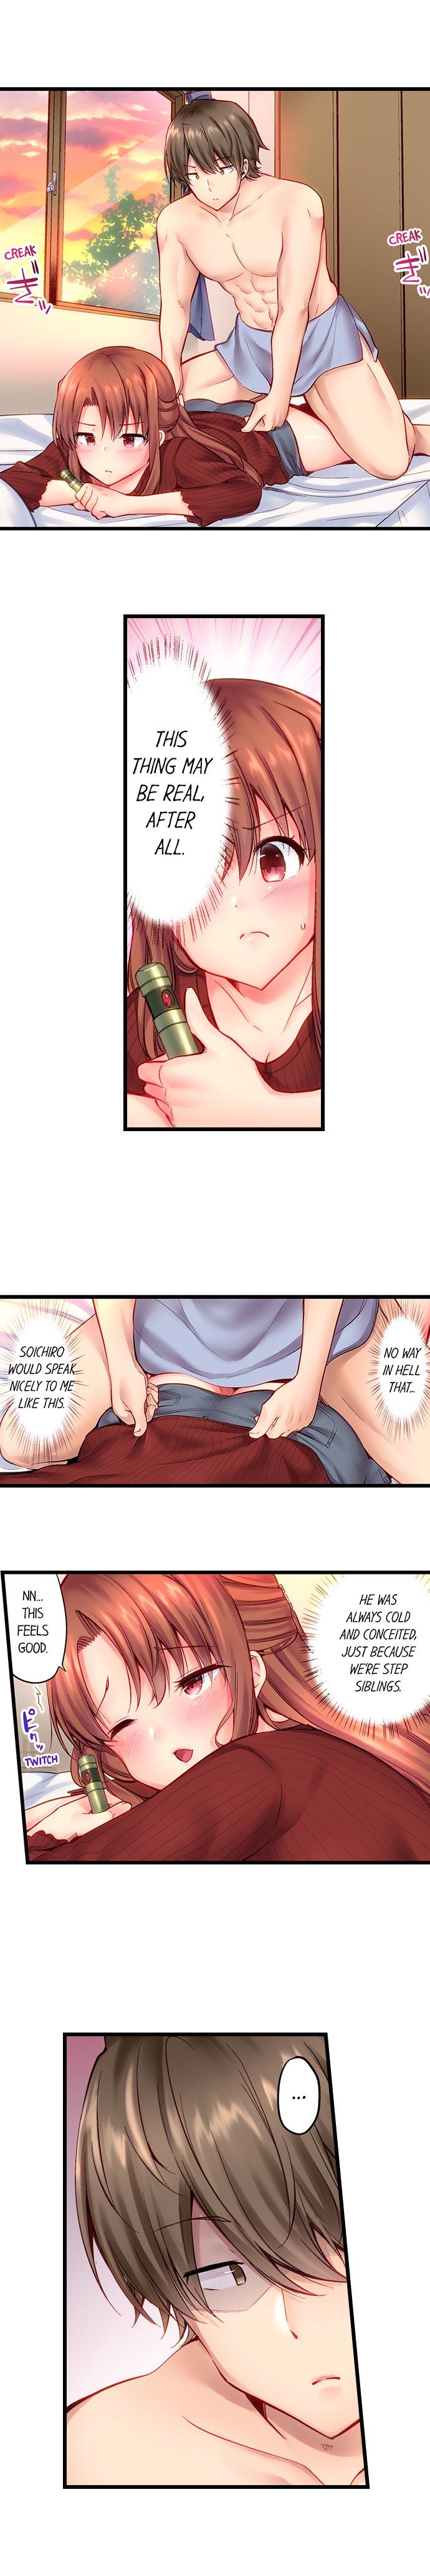 "Hypnotized" Sex with My Brother Ch.5/? 9